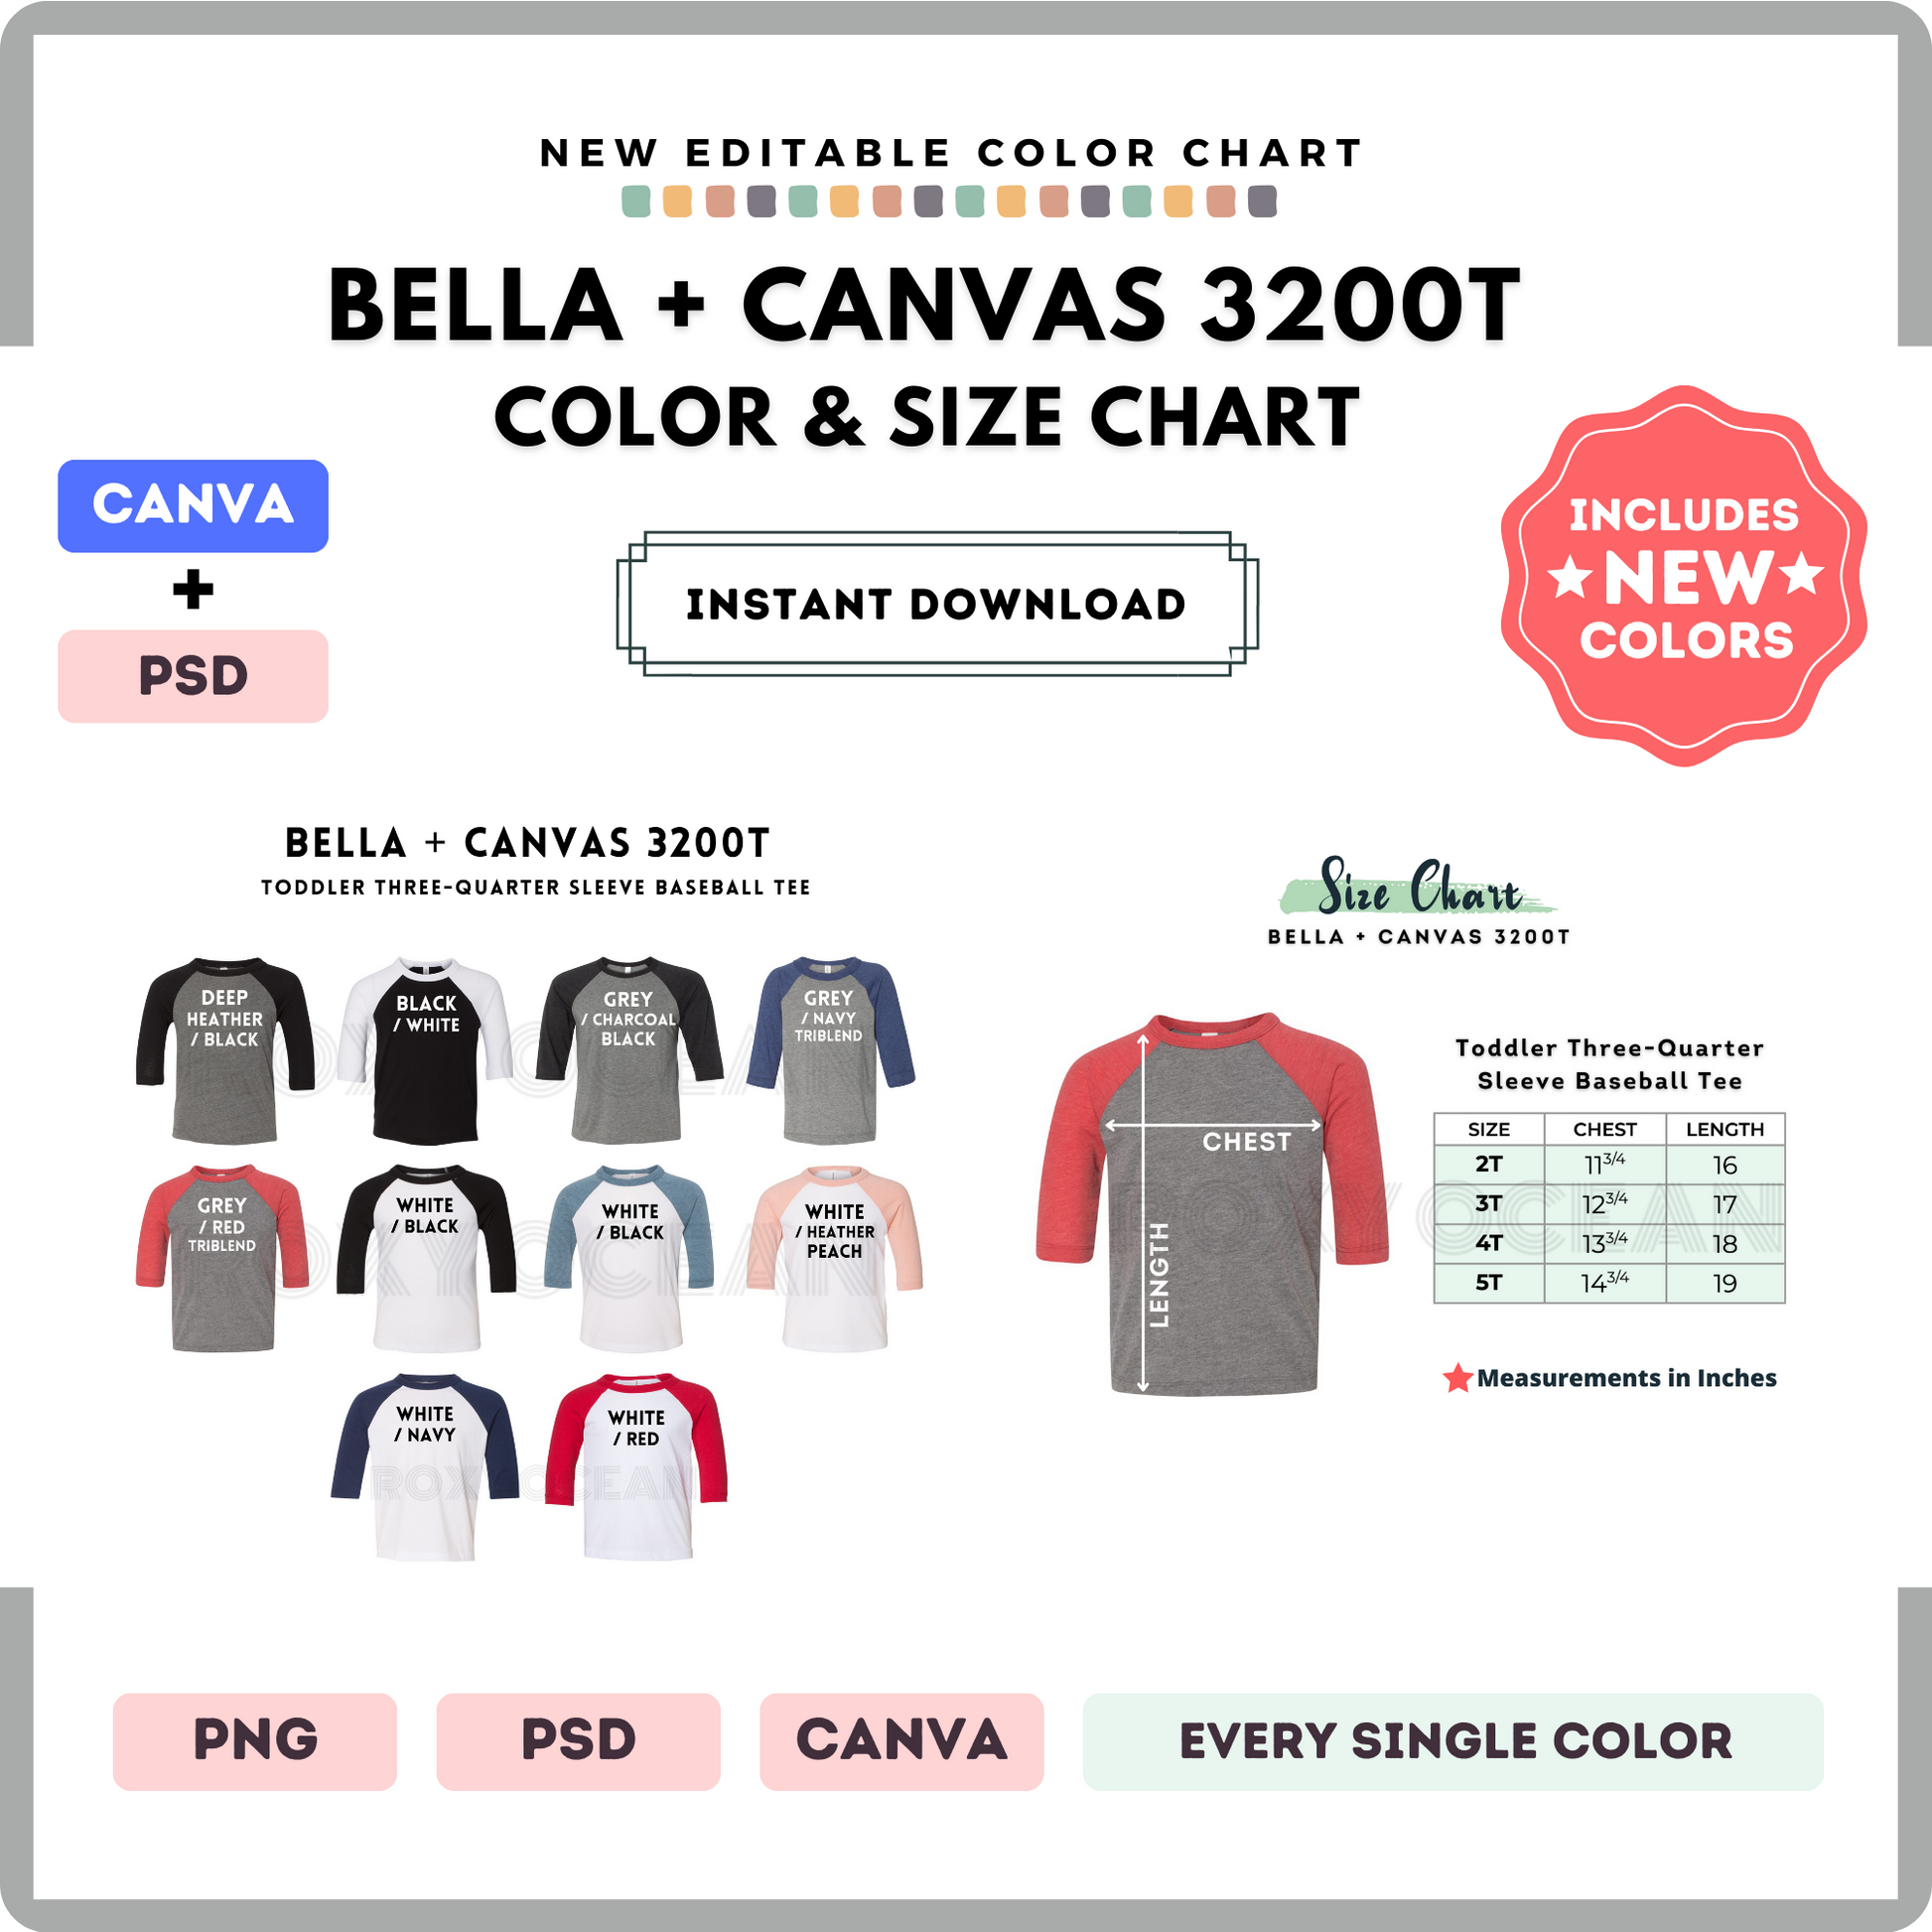 Bella Canvas 3200T Color and Size Chart